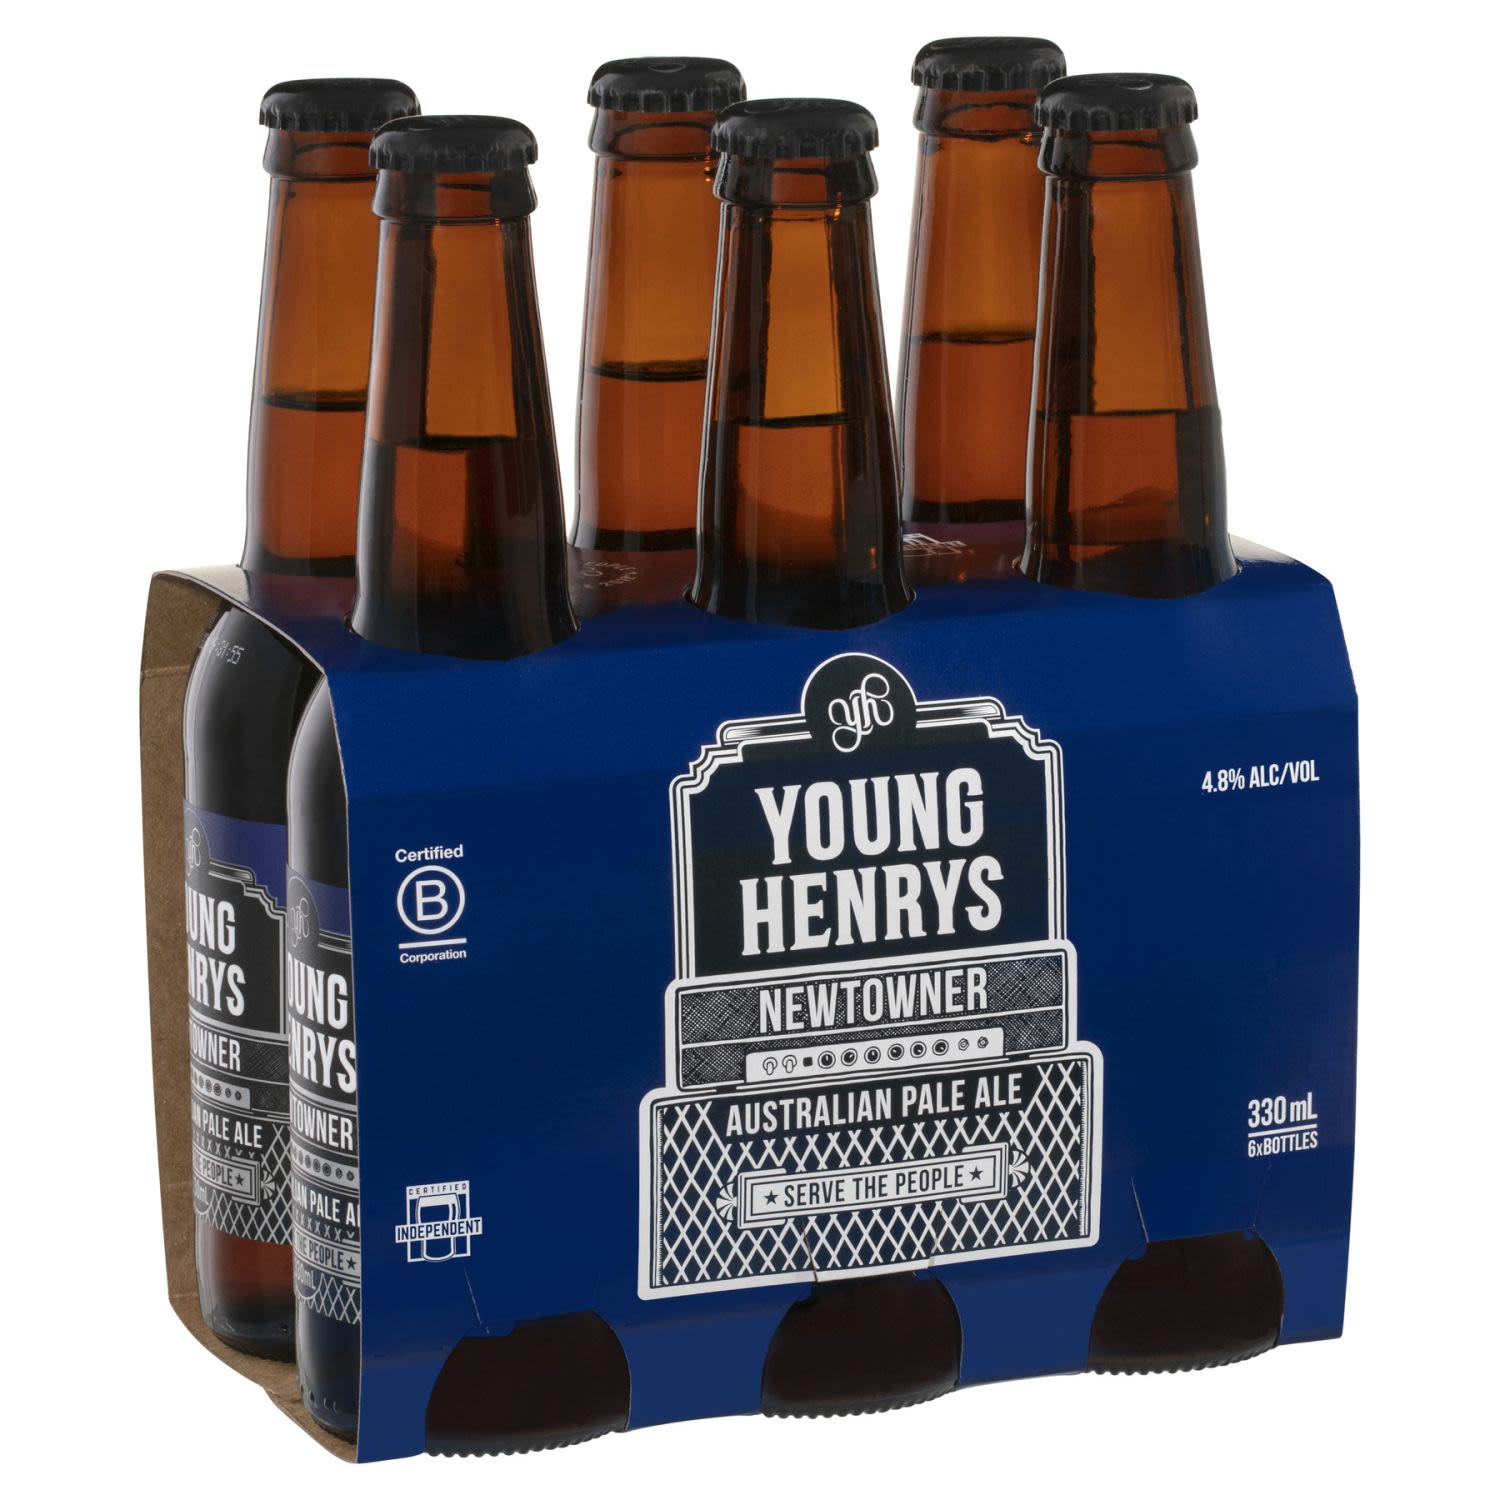 Young Henrys Newtowner Bottle 330mL 6 Pack